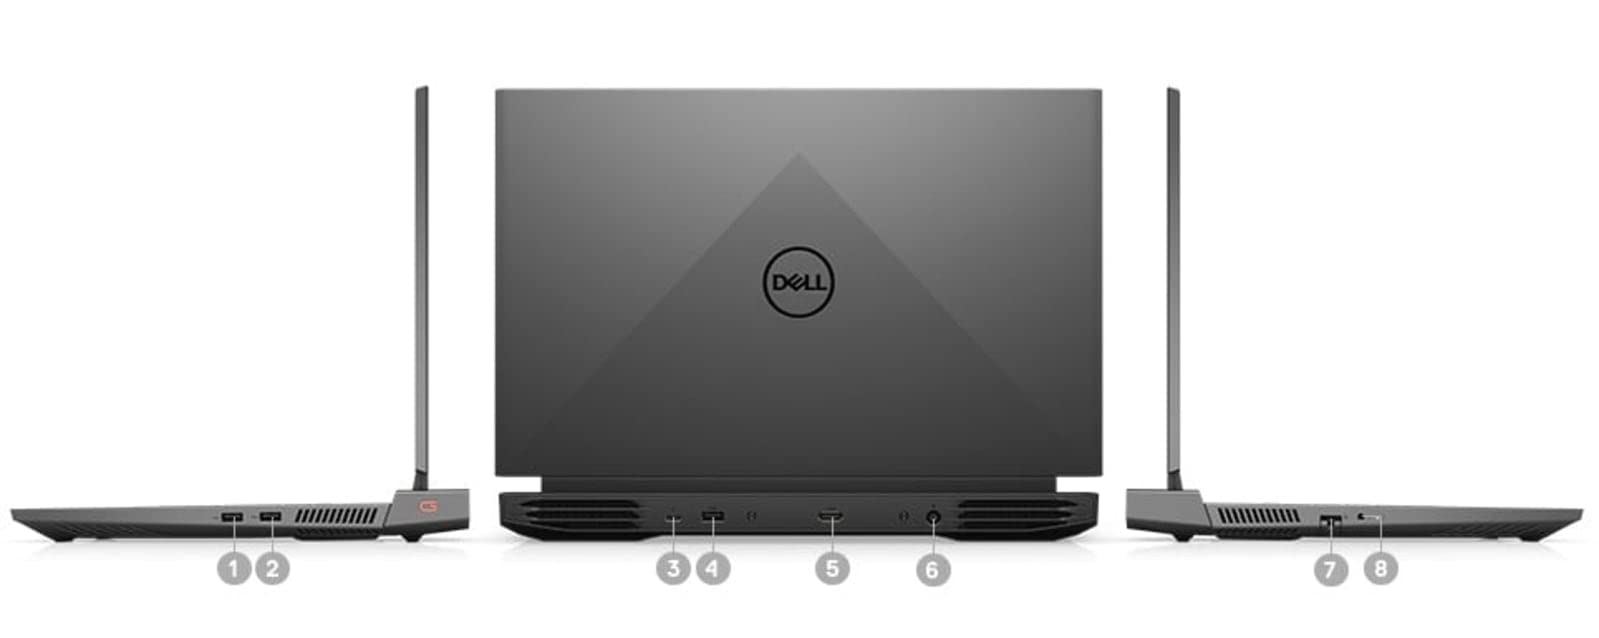 Dell G15 5511 Gaming Laptop (2021) | 15.6